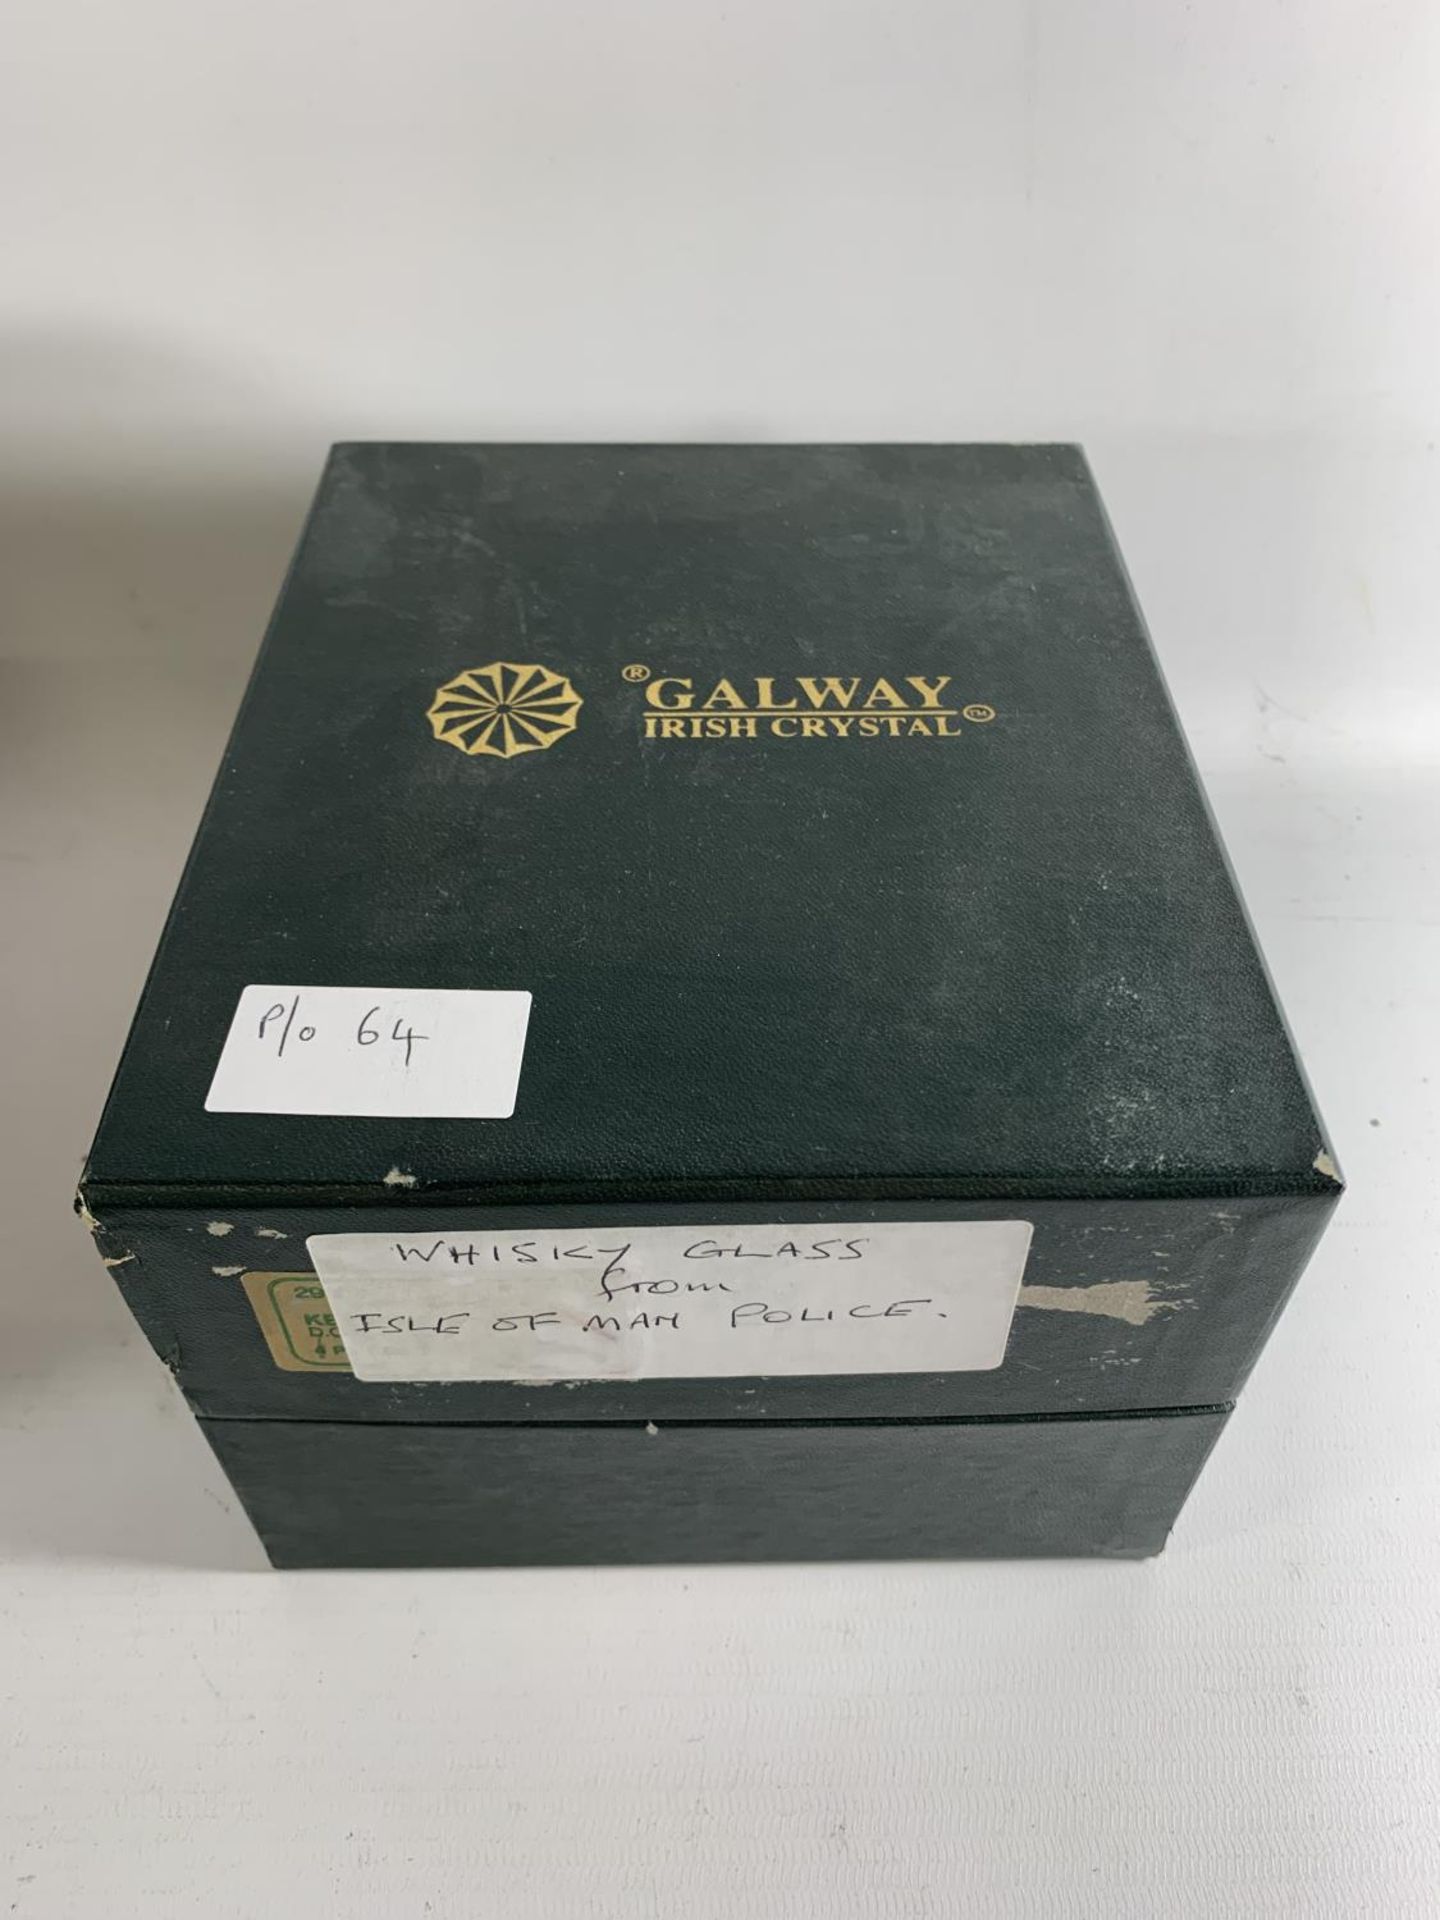 * THREE BOXED ITEMS OF PRESENTATION GLASS, WHISKY GLASS FROM ISLE OF MAN POLICE, DECANTER FROM - Image 4 of 10